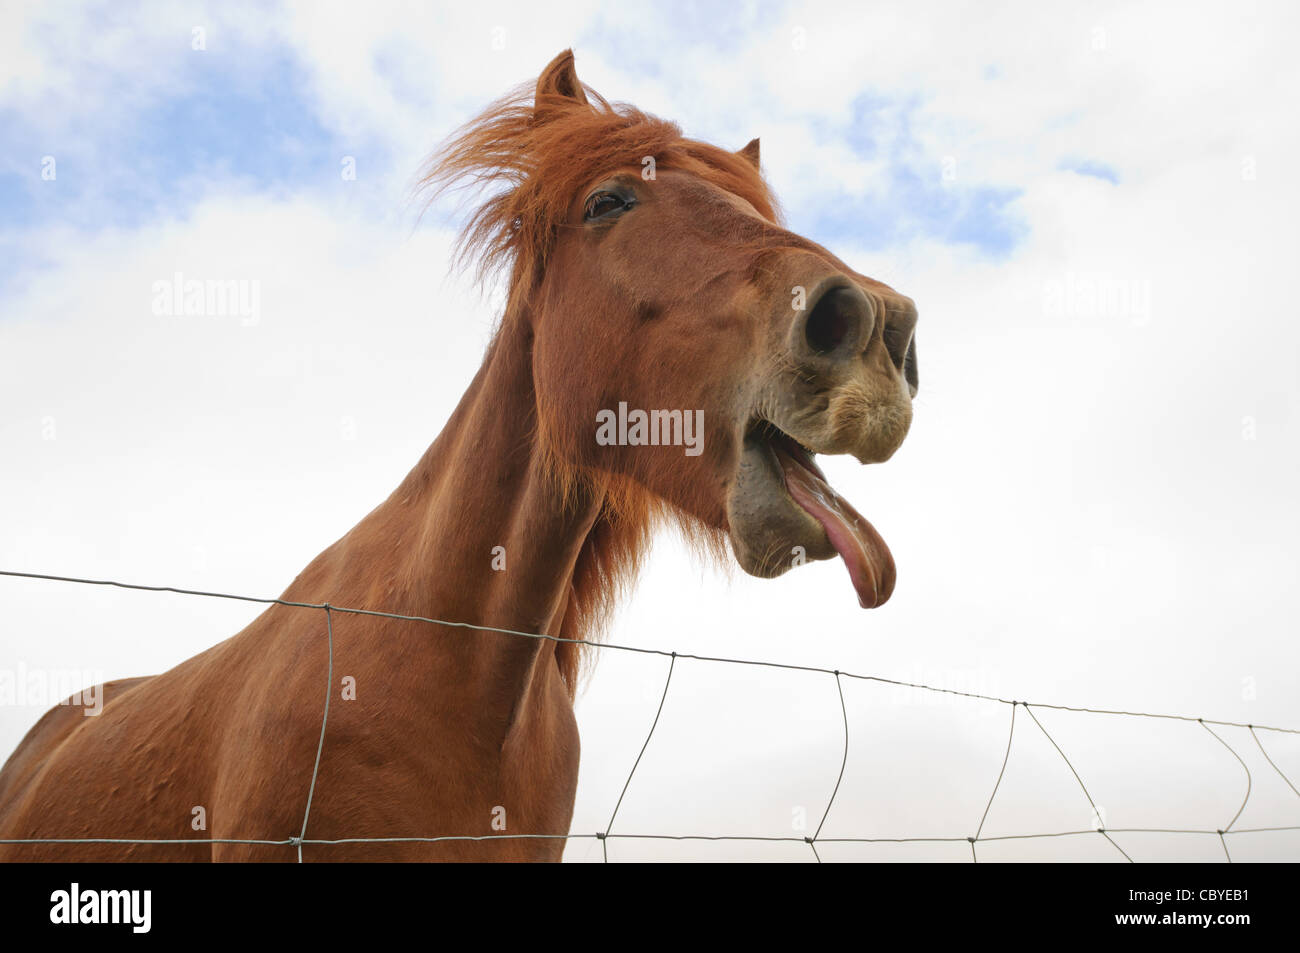 An Icelandic horse makes funny facial expressions. Stock Photo